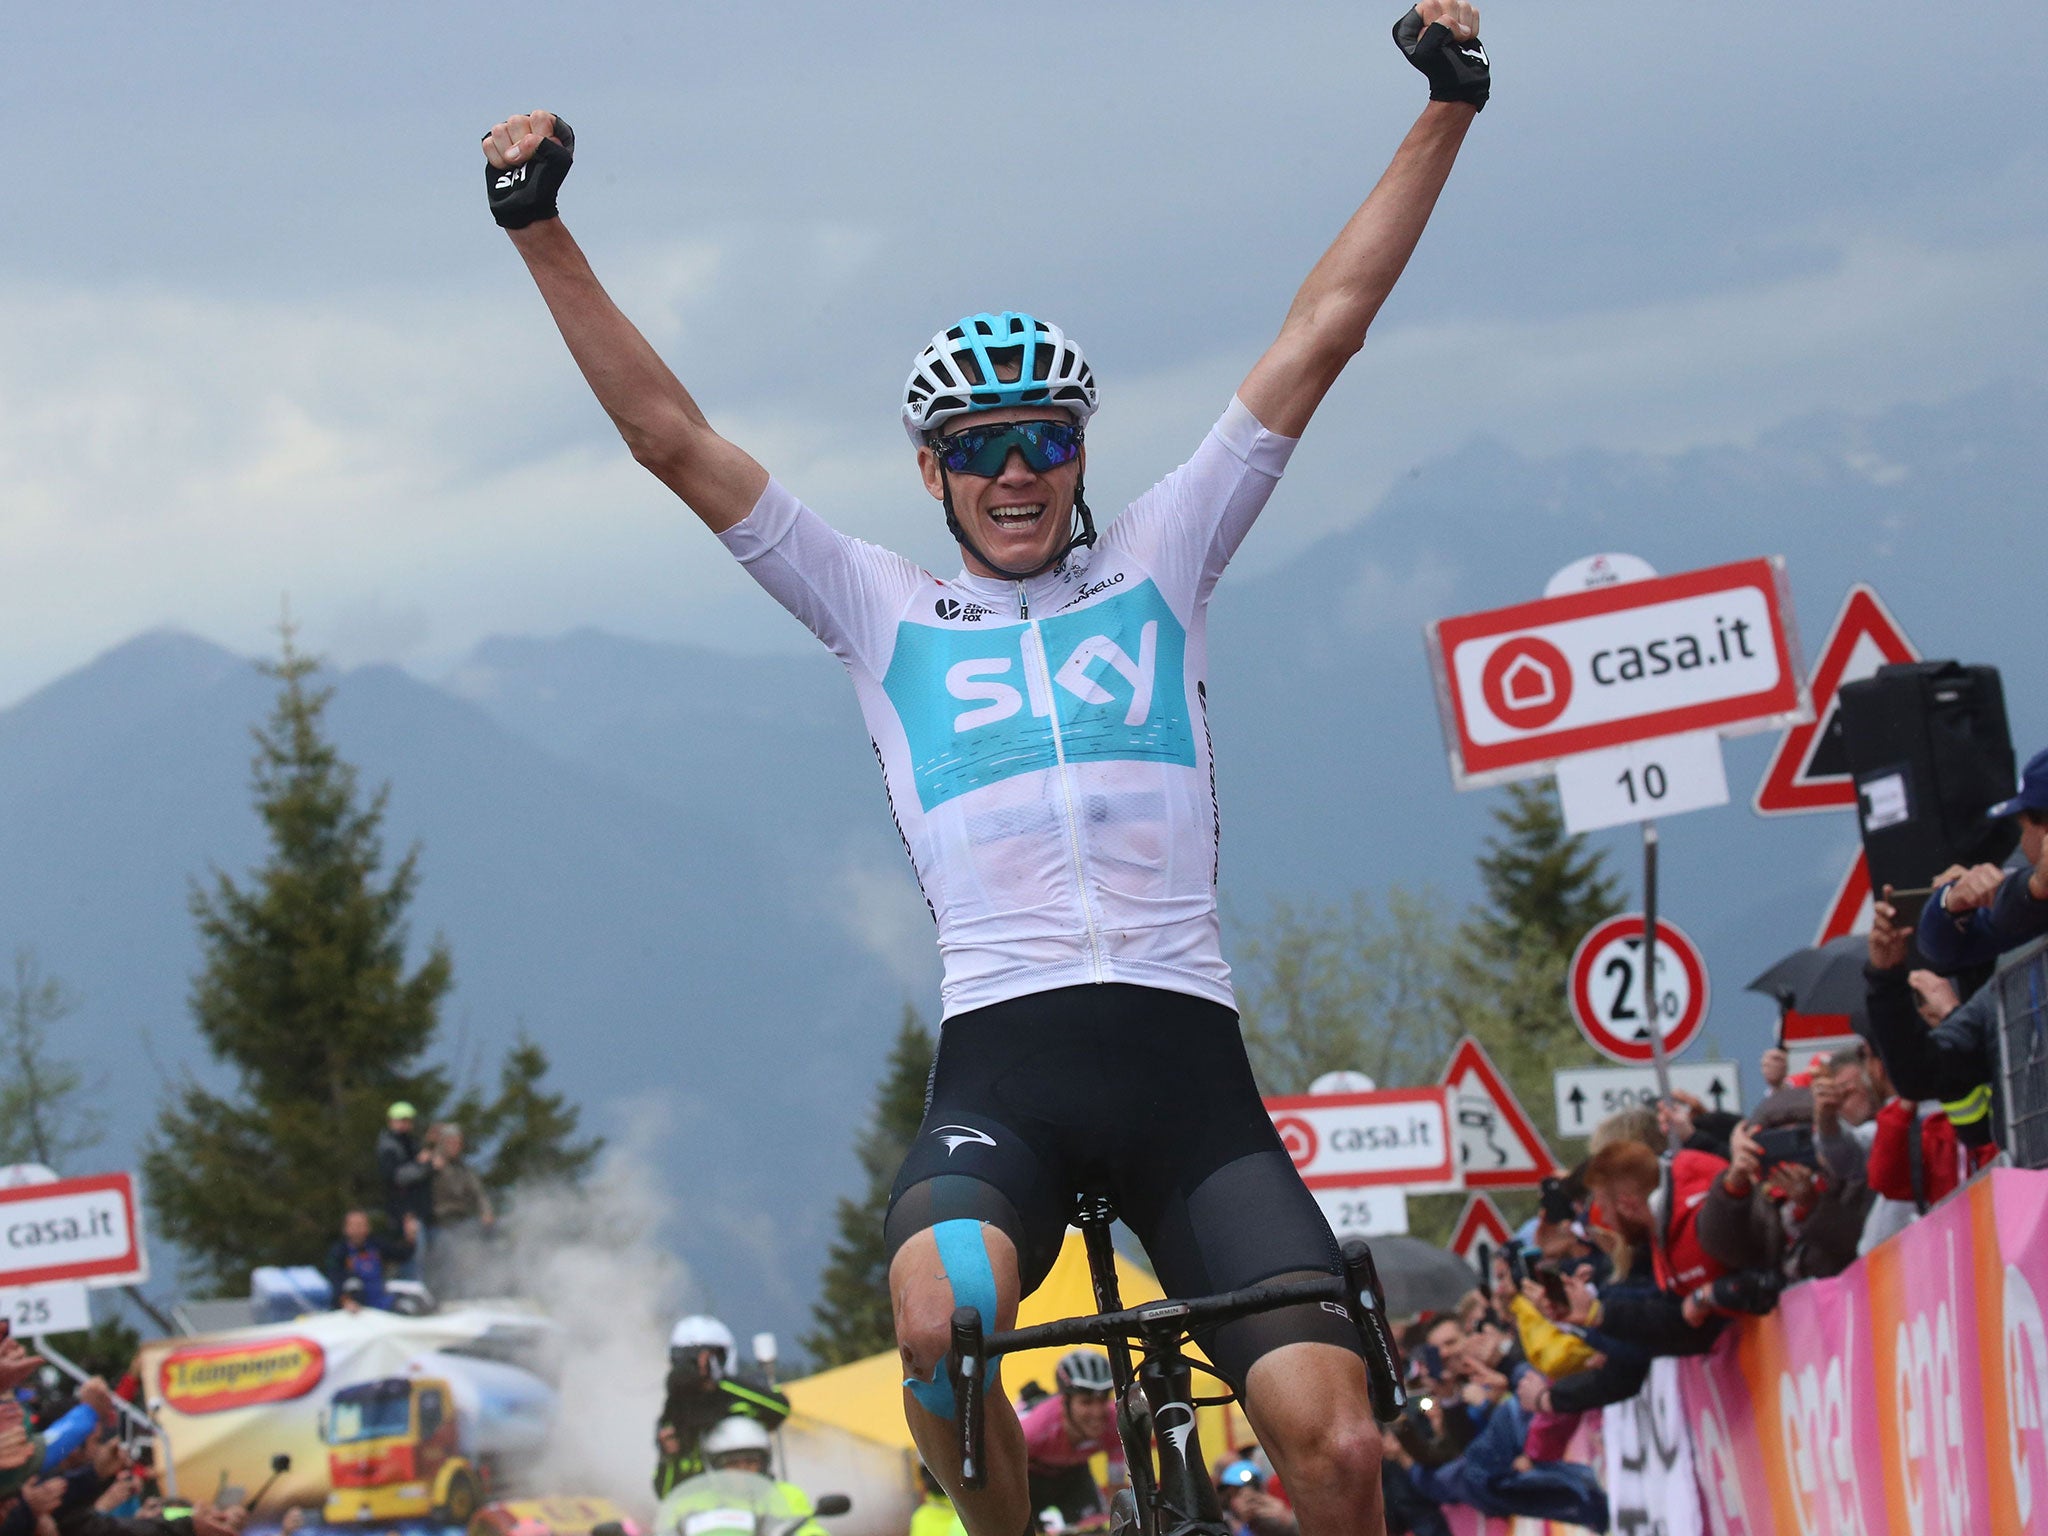 Chris Froome celebrates as he crosses the line in first place